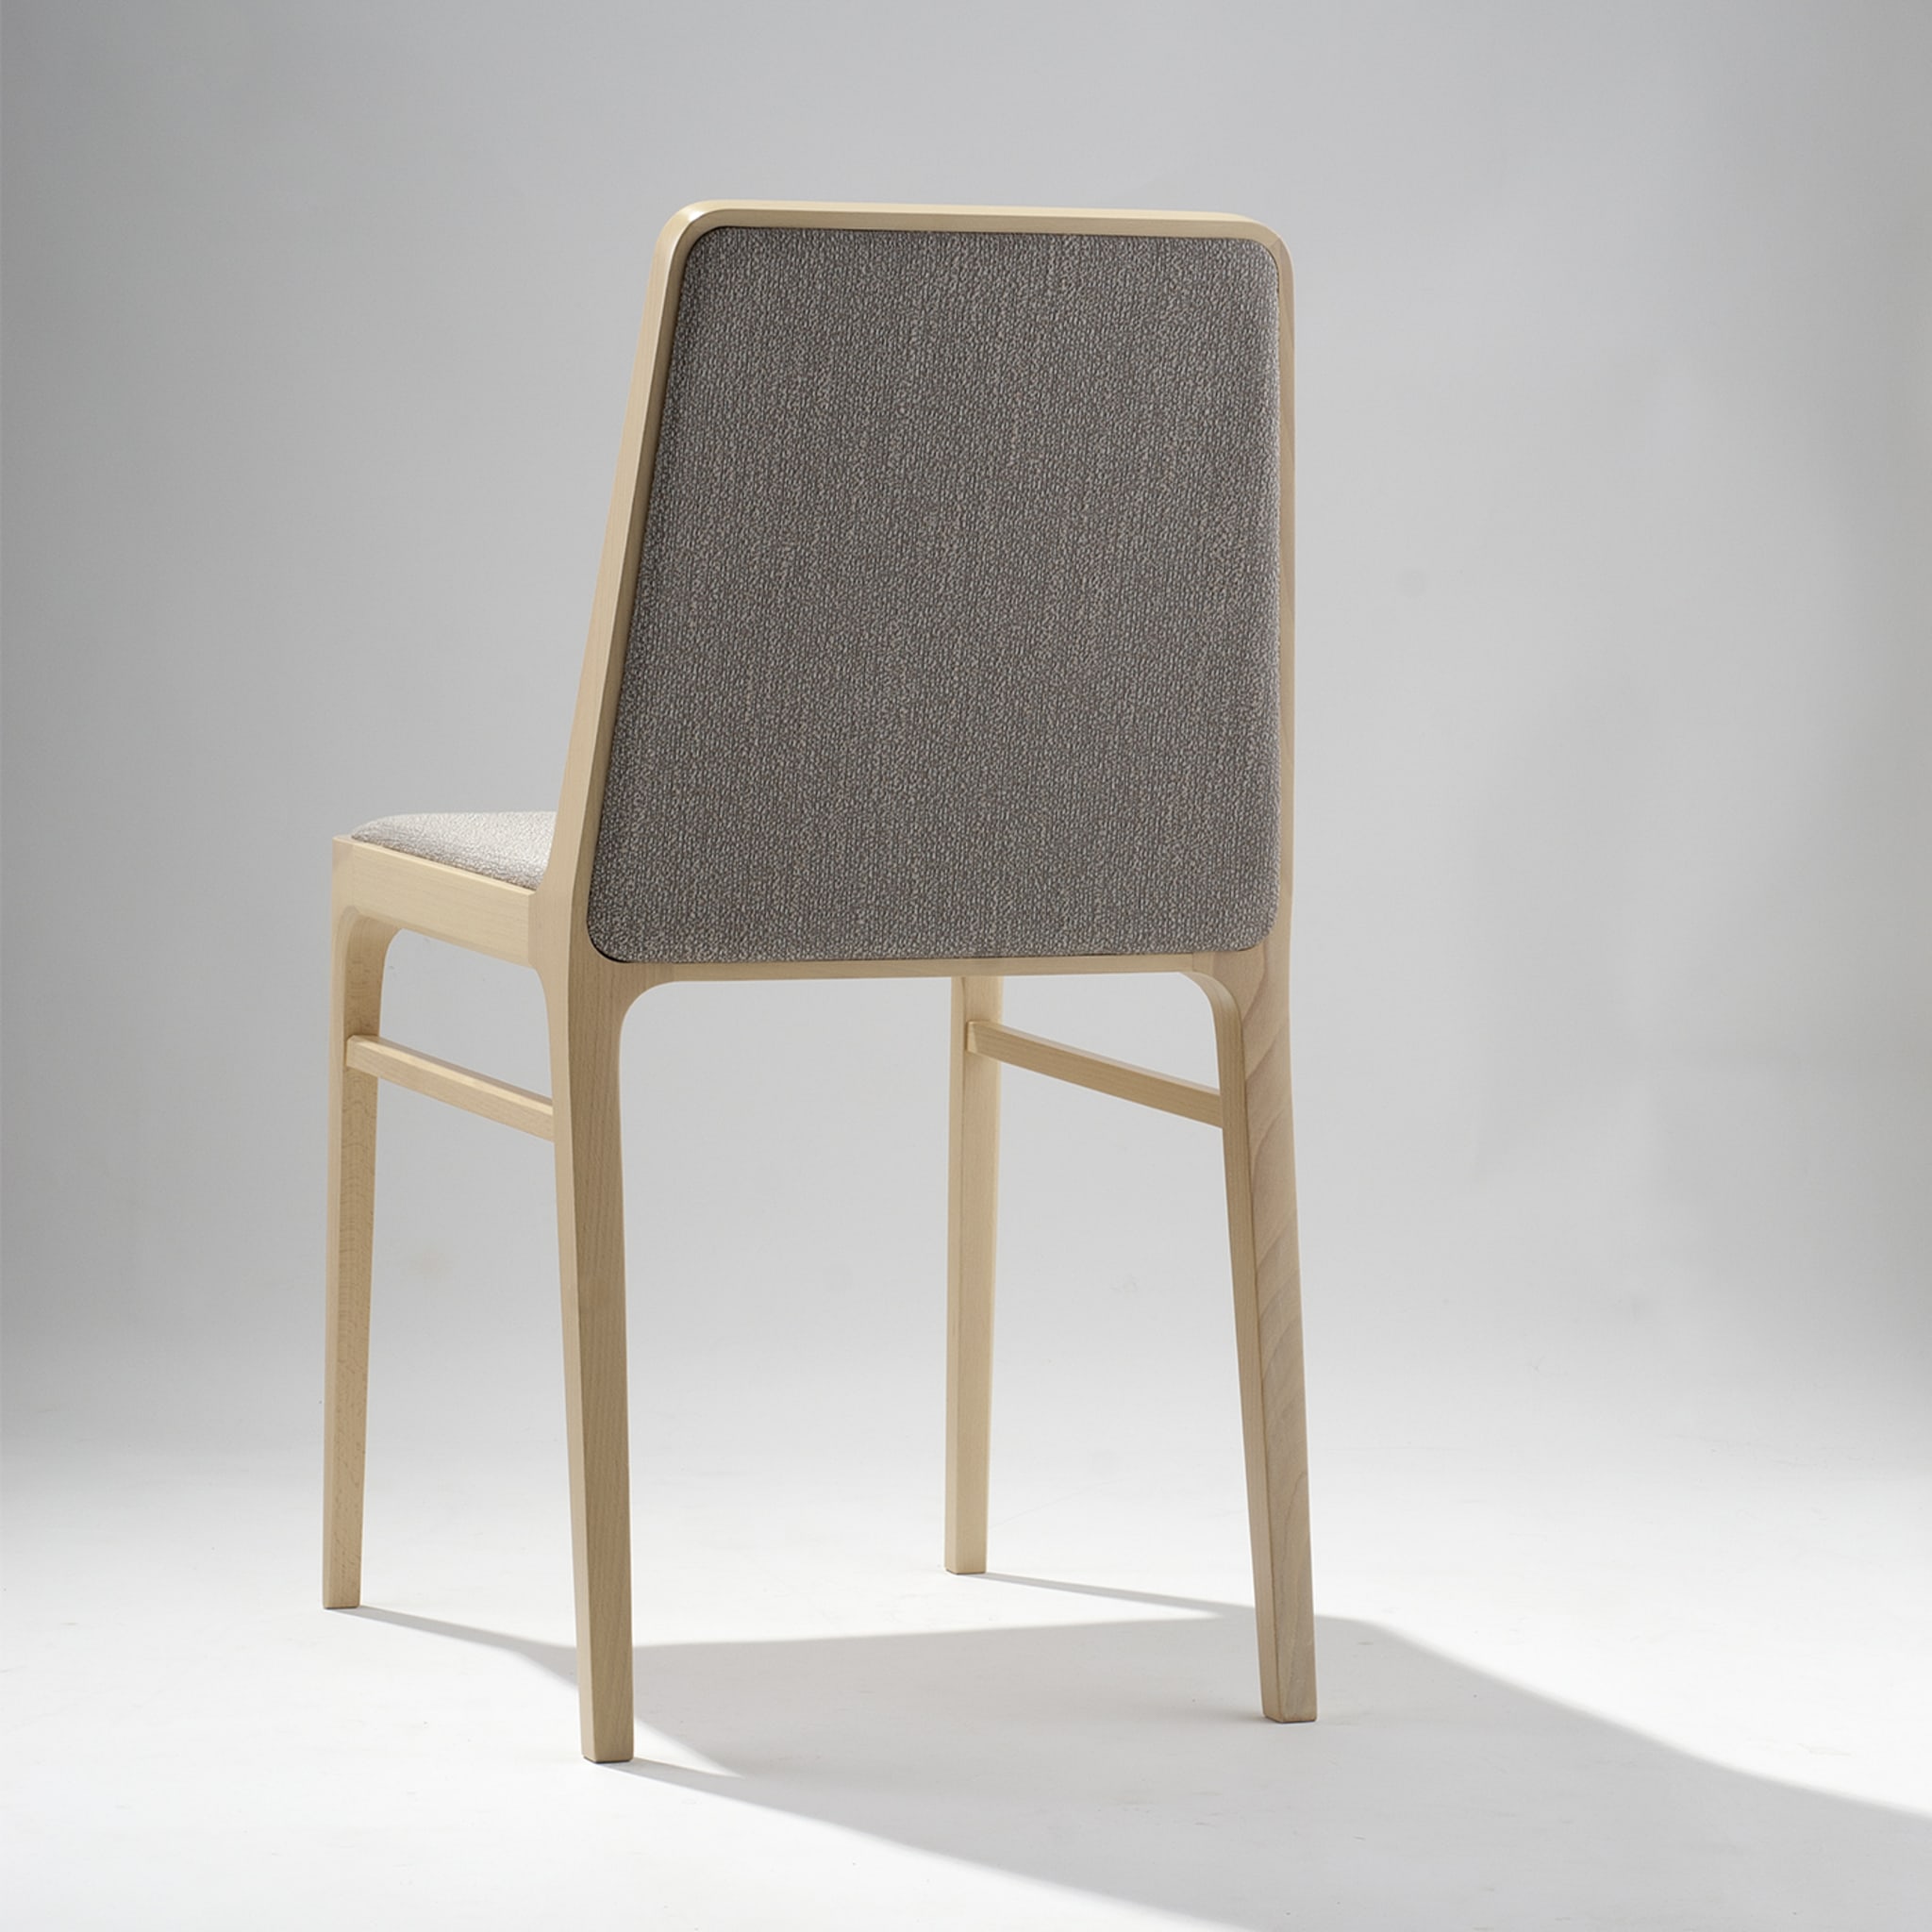 Tip Tap 380 Gray Chair by Claudio Perin - Alternative view 1